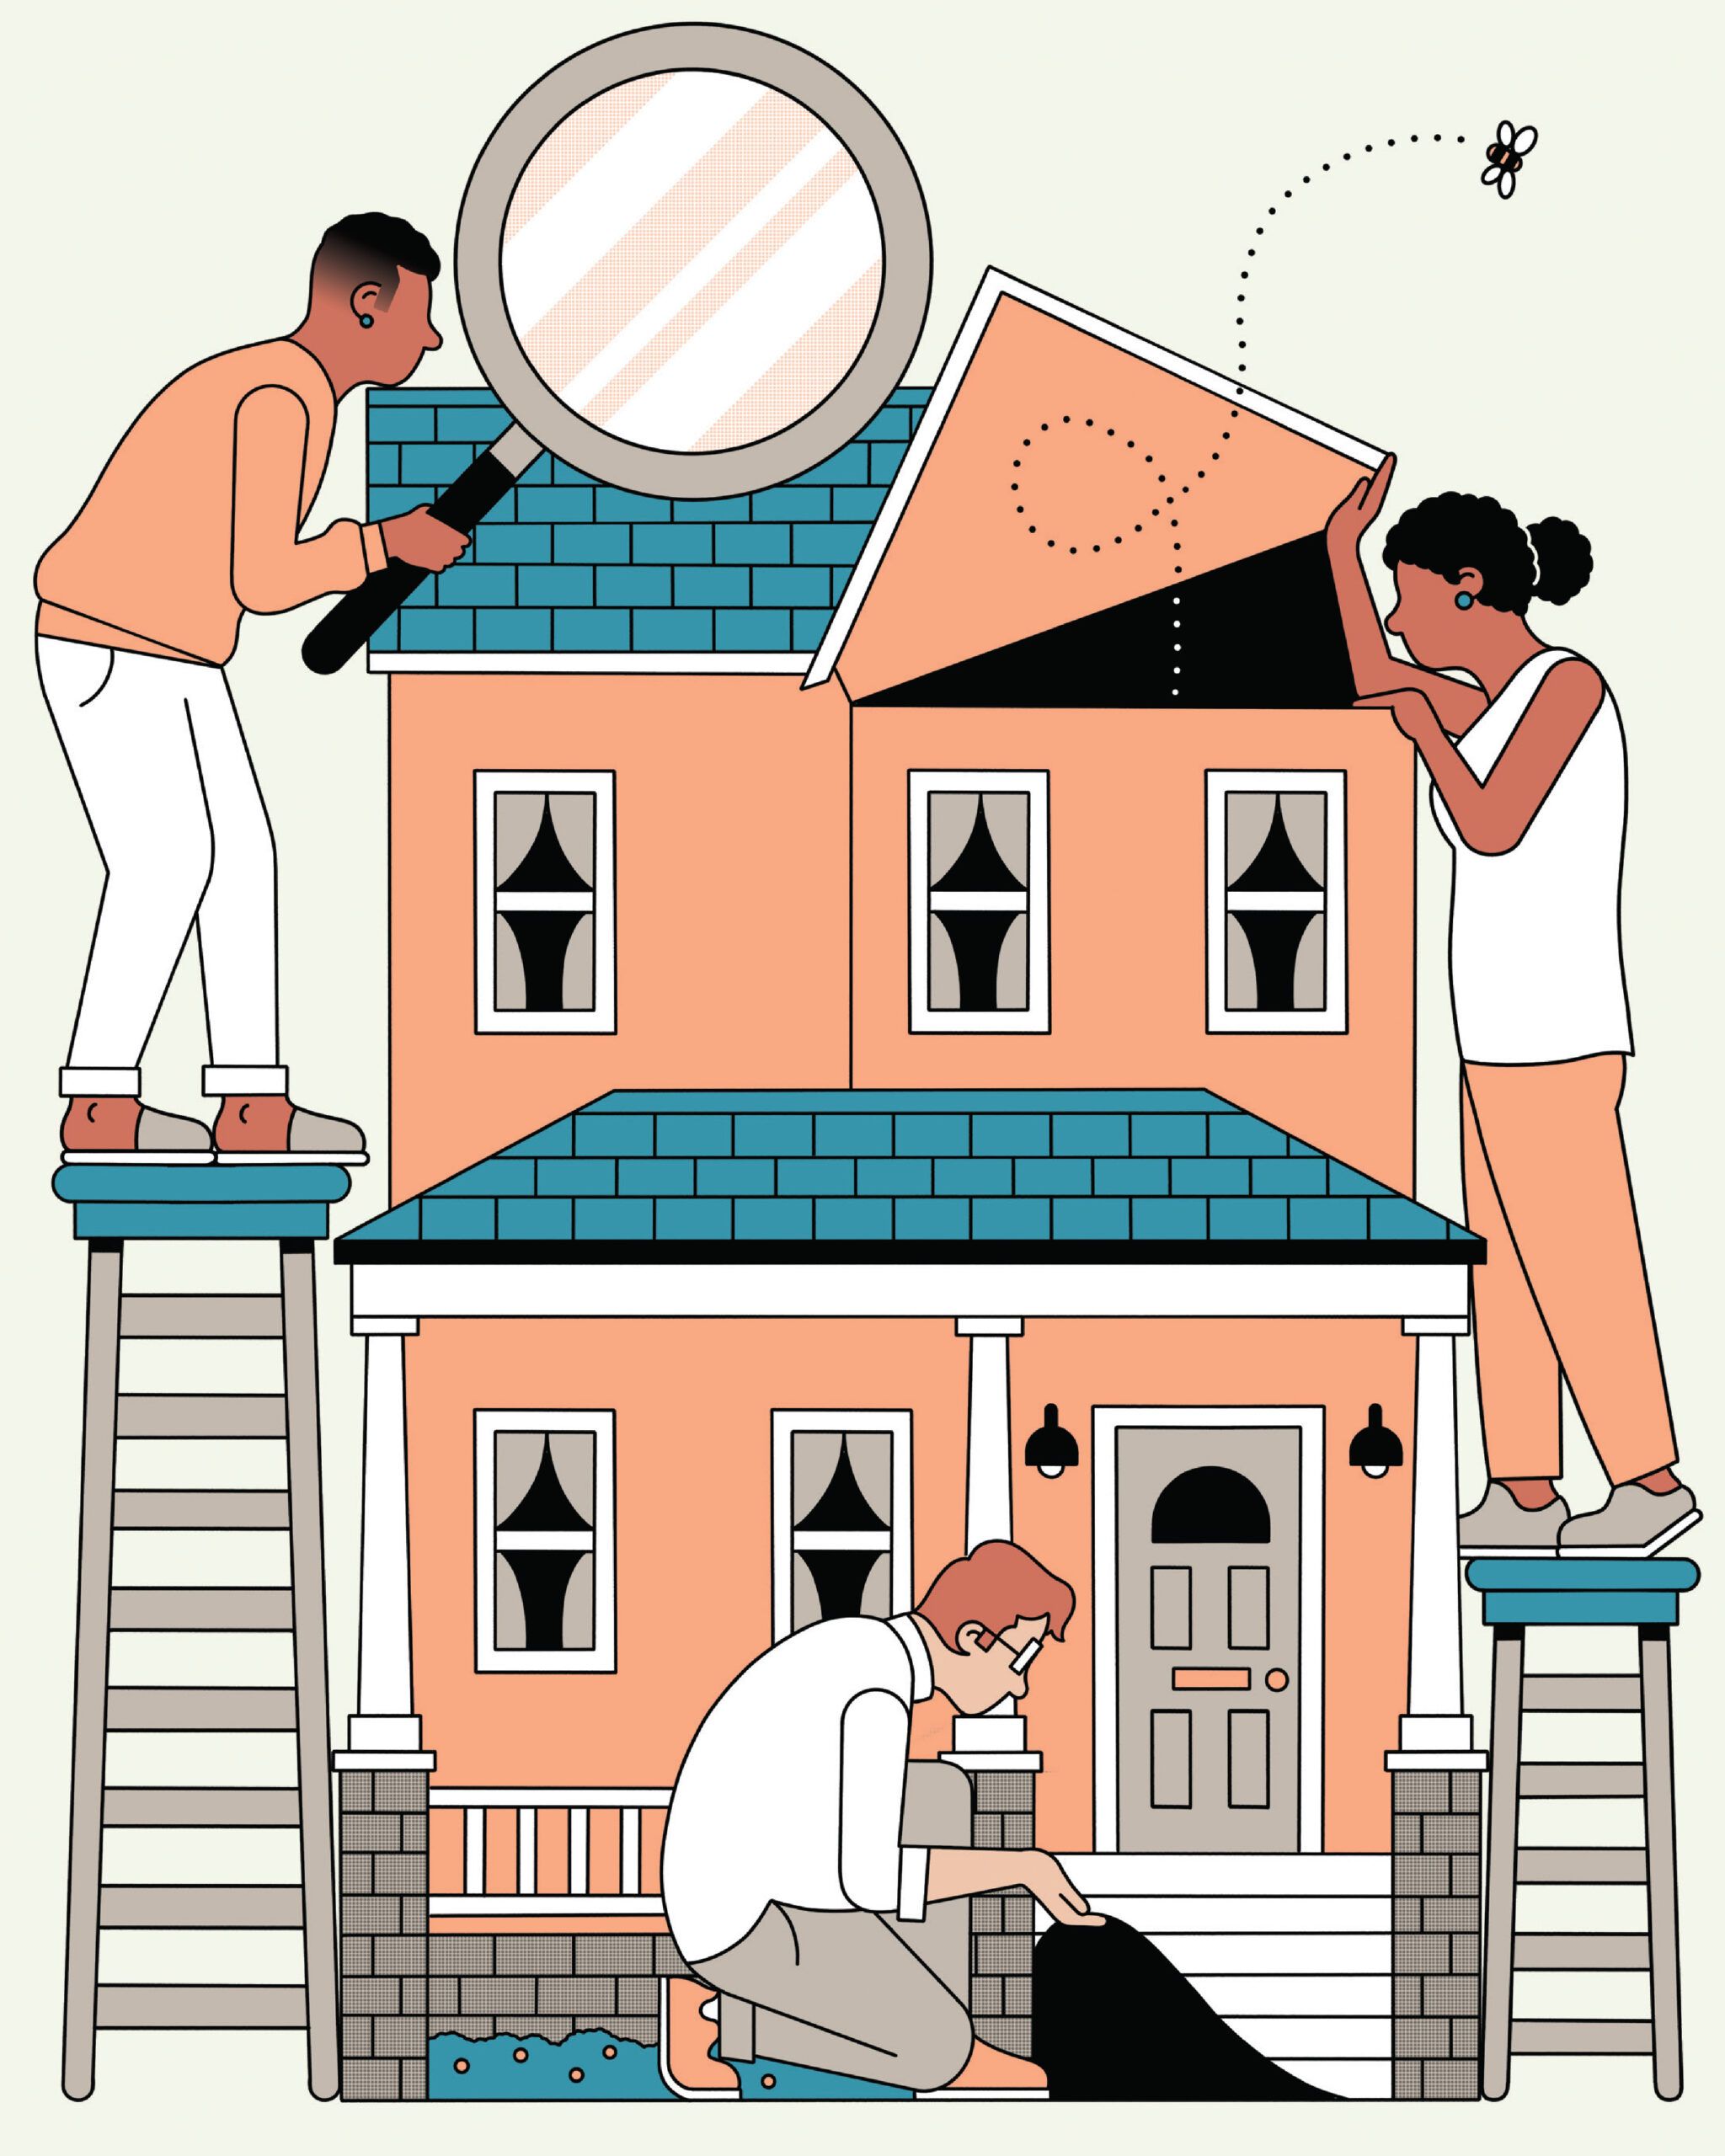 Illustration of people inspecting an old home